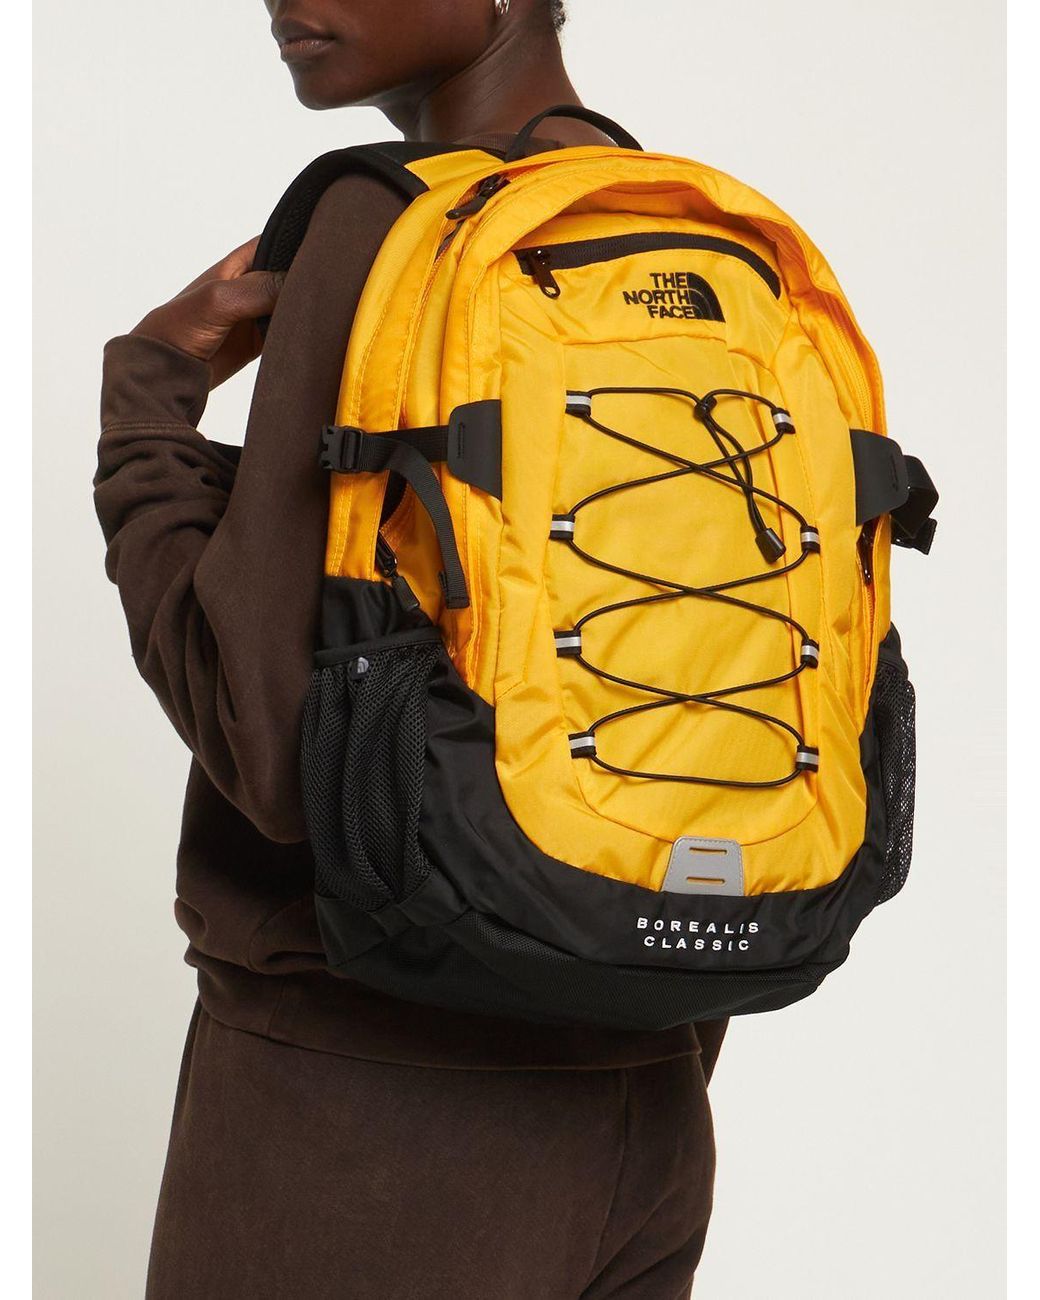 The North Face 29l Borealis Classic Nylon Backpack in Yellow | Lyst